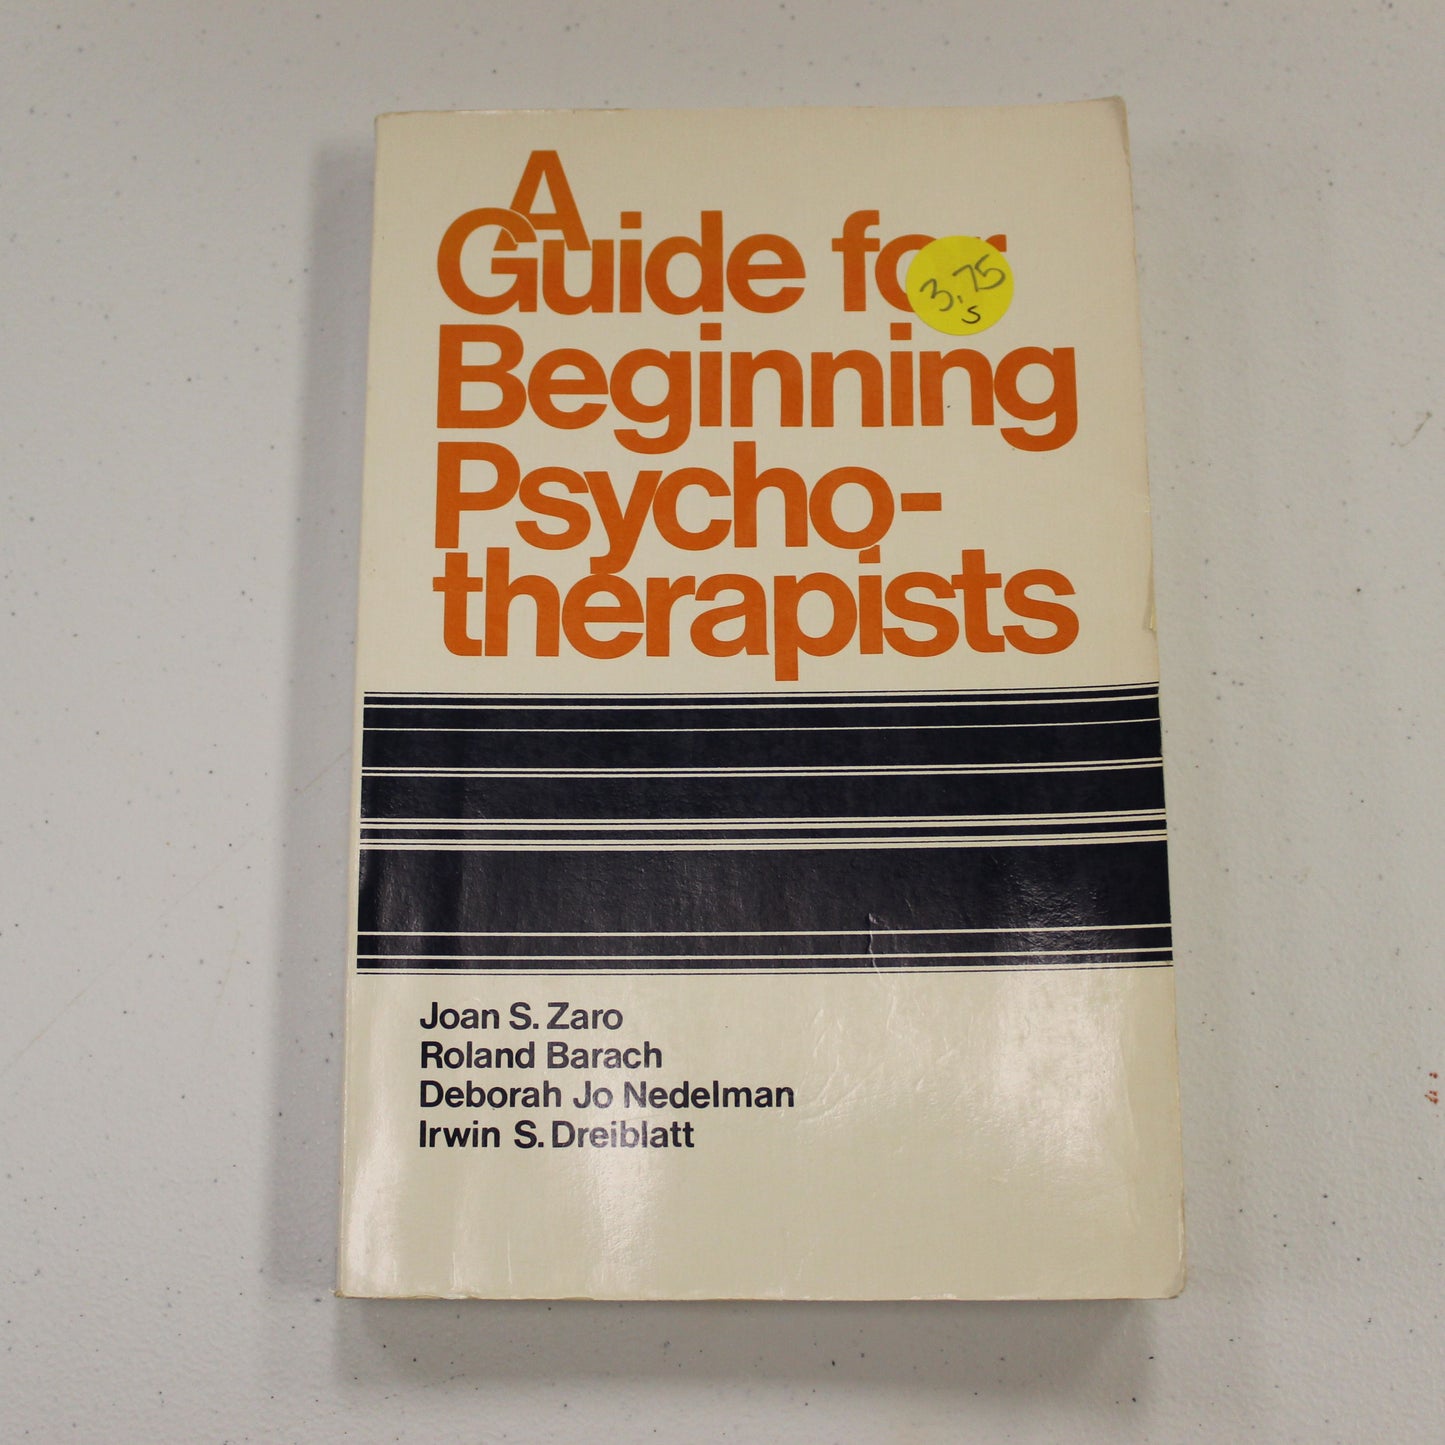 A GUIDE FOR BEGINNING PSYCHOTHERAPISTS